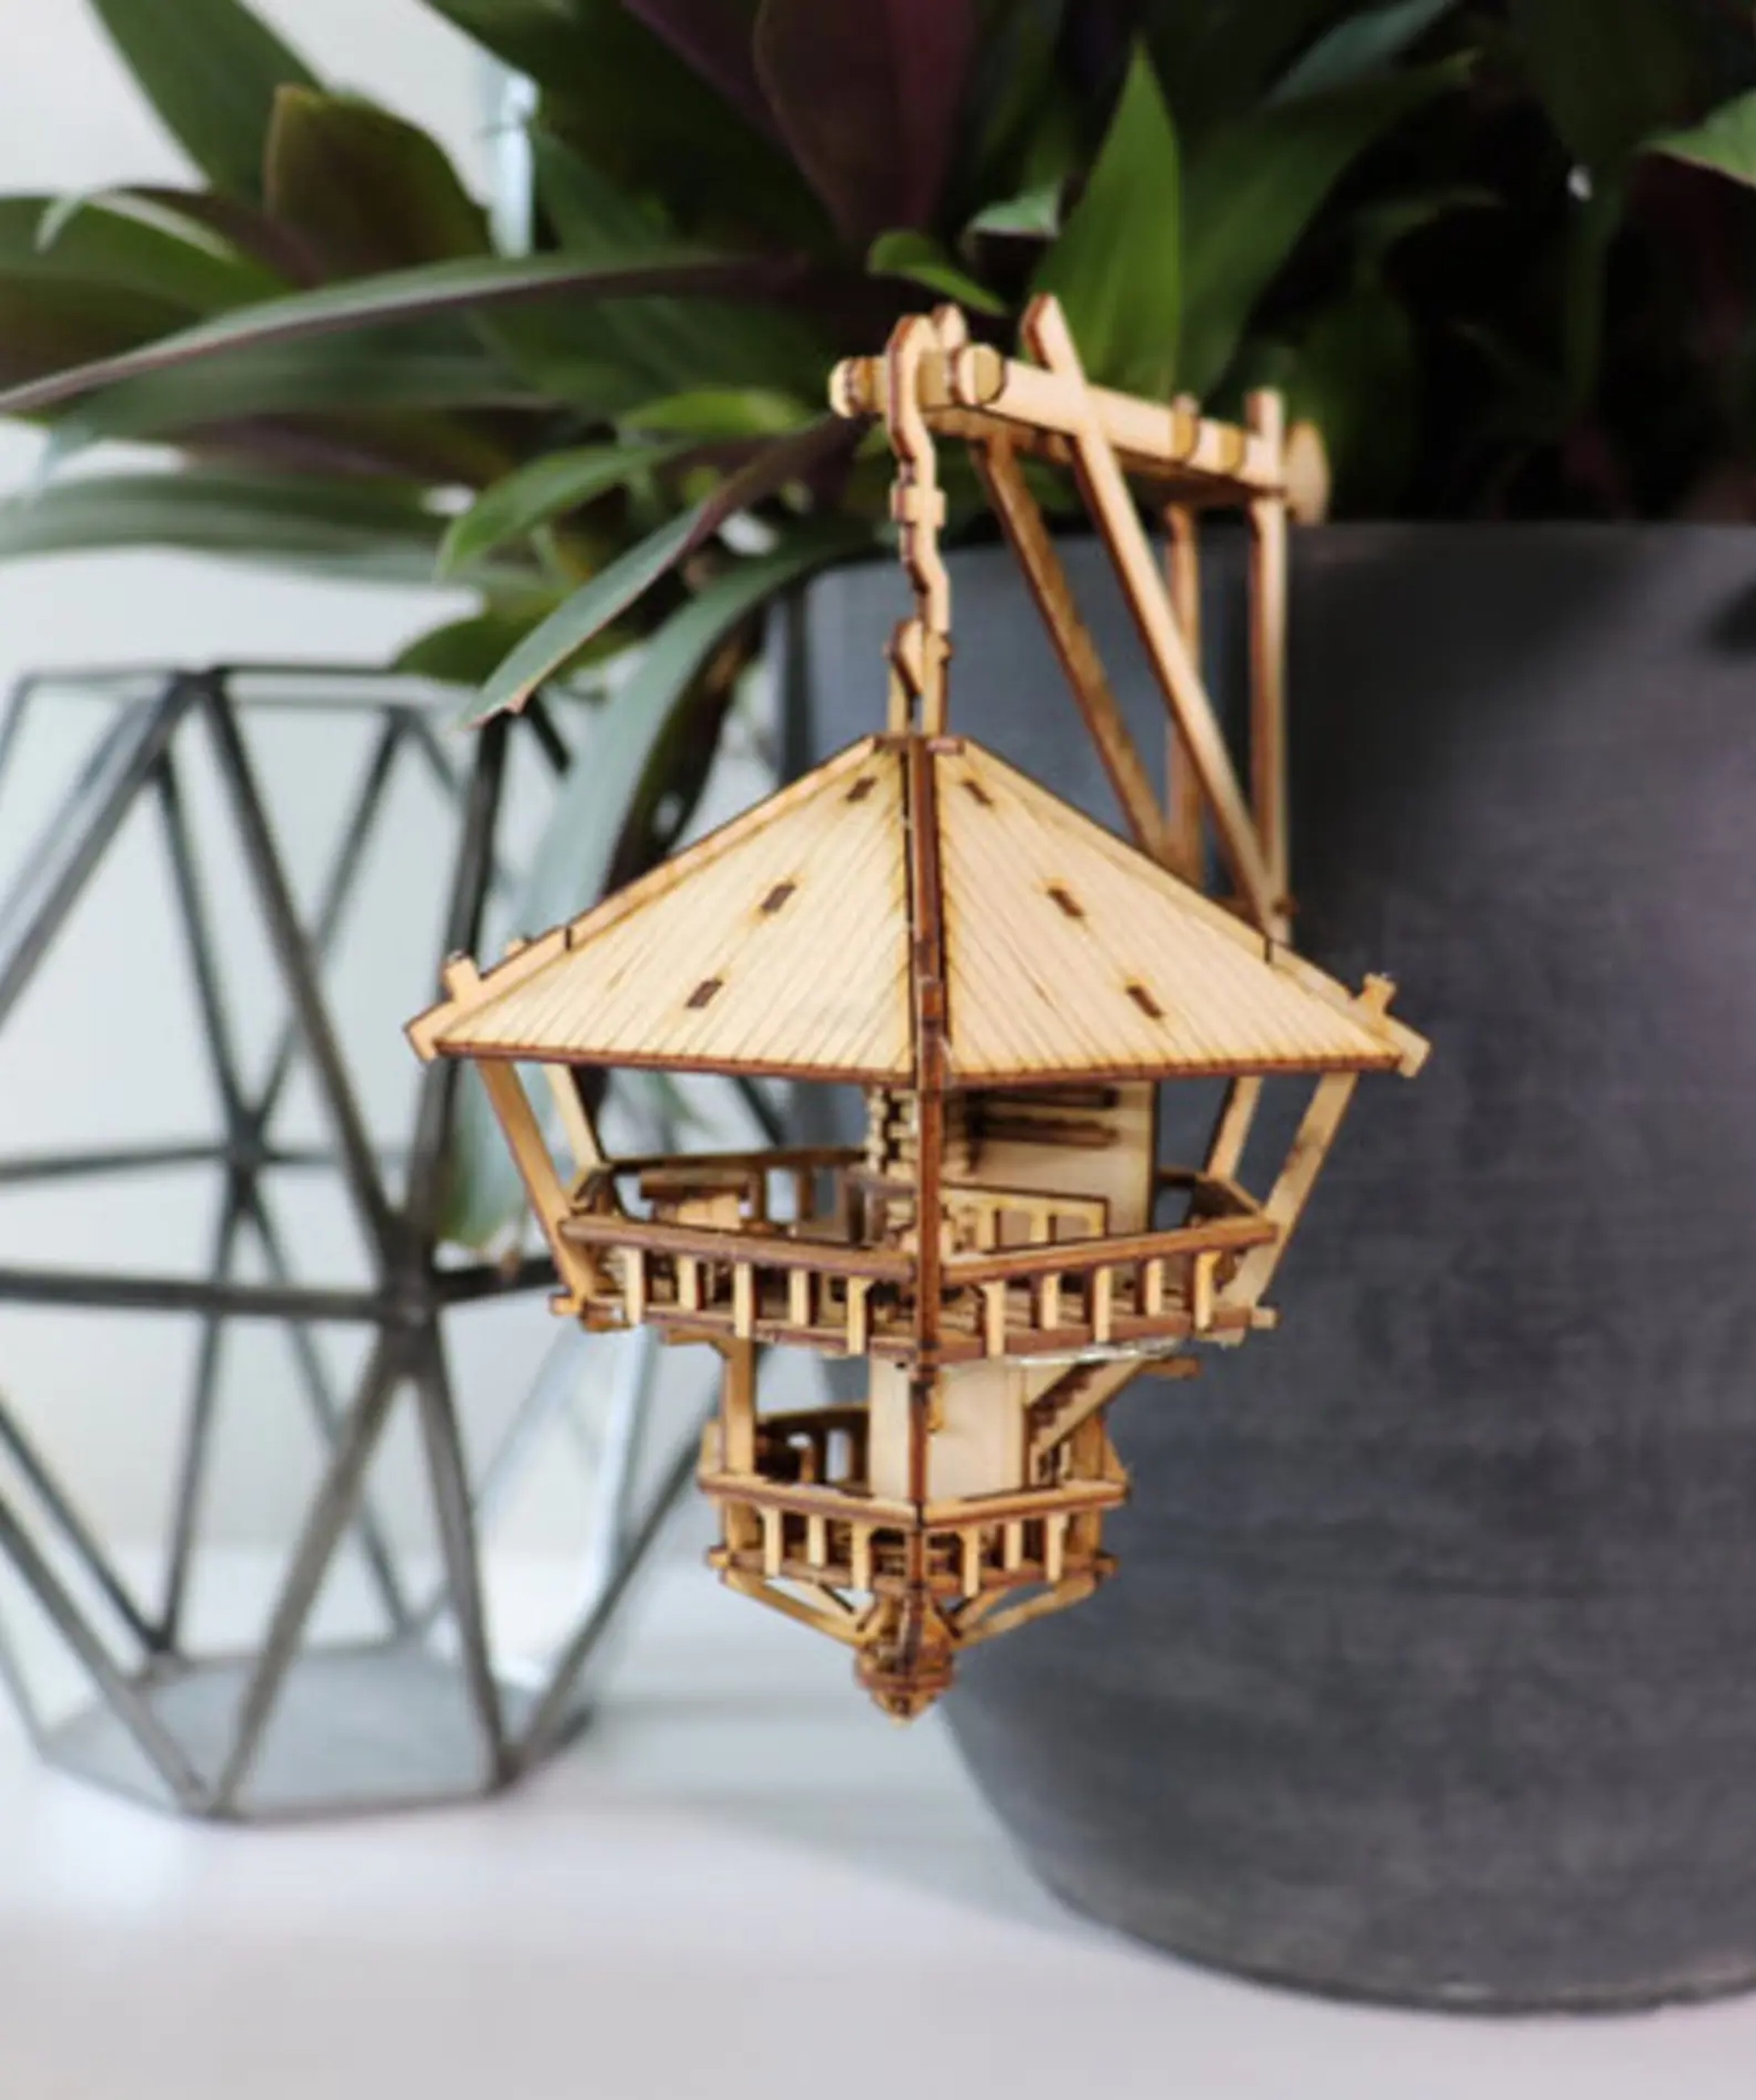 We adore working with Tiny Treehouses, who have come up with a stupendous idea of making DIY model treehouse kits for your pot plants.